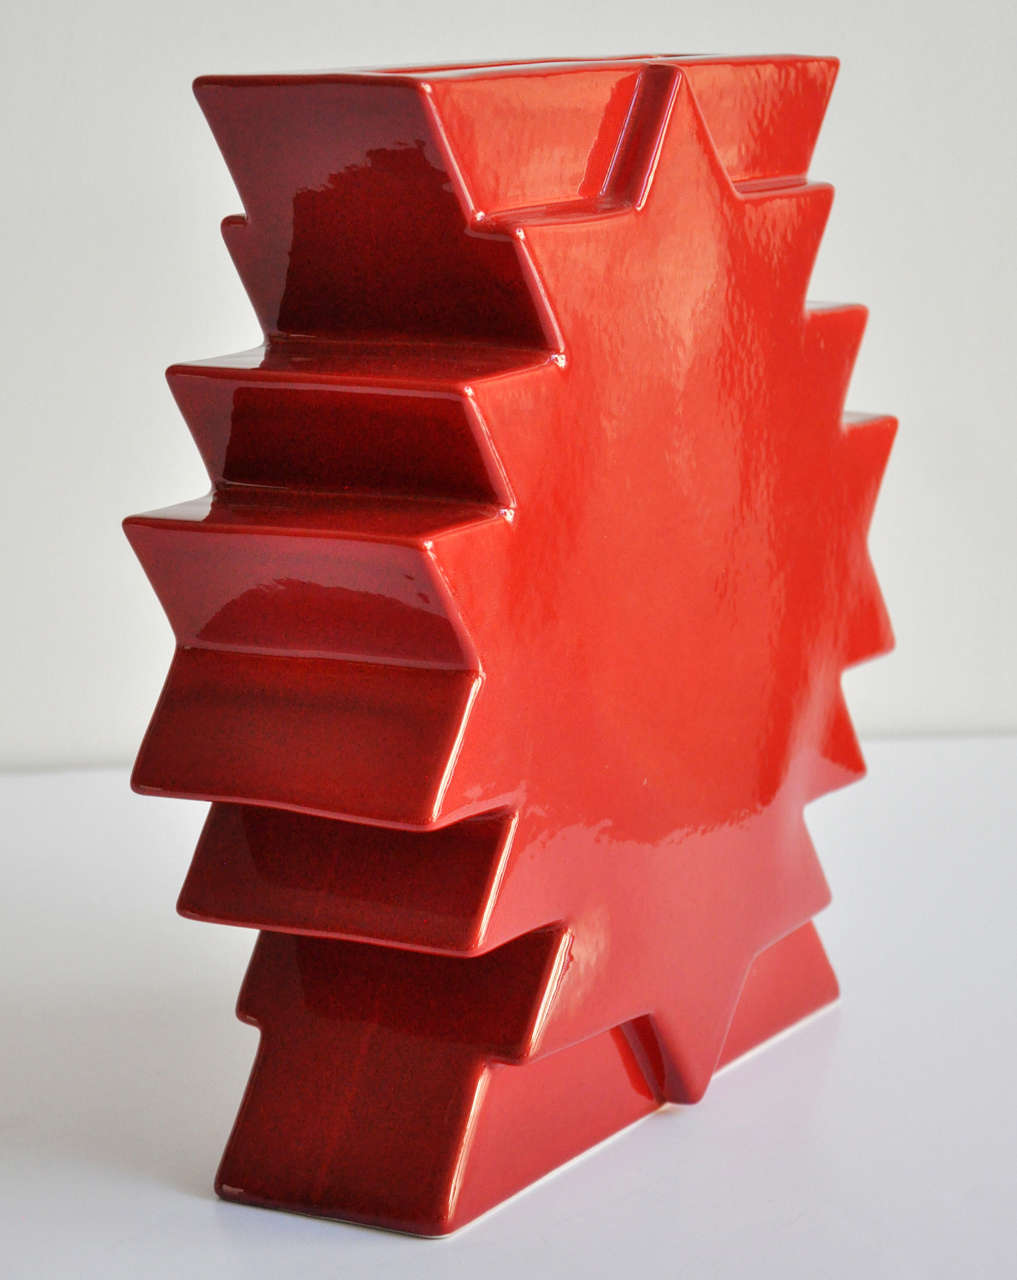 A red glazed ceramic vase by Memphis founder Ettore Sottsass from the Yantra di terracotta series. Manufactured by Edizioni Arte Design Agliana Pistoia Italia. Marked Sottsass Y/28. Maker's decal (EAD) on underside.

Reference: Ettore Sottsass